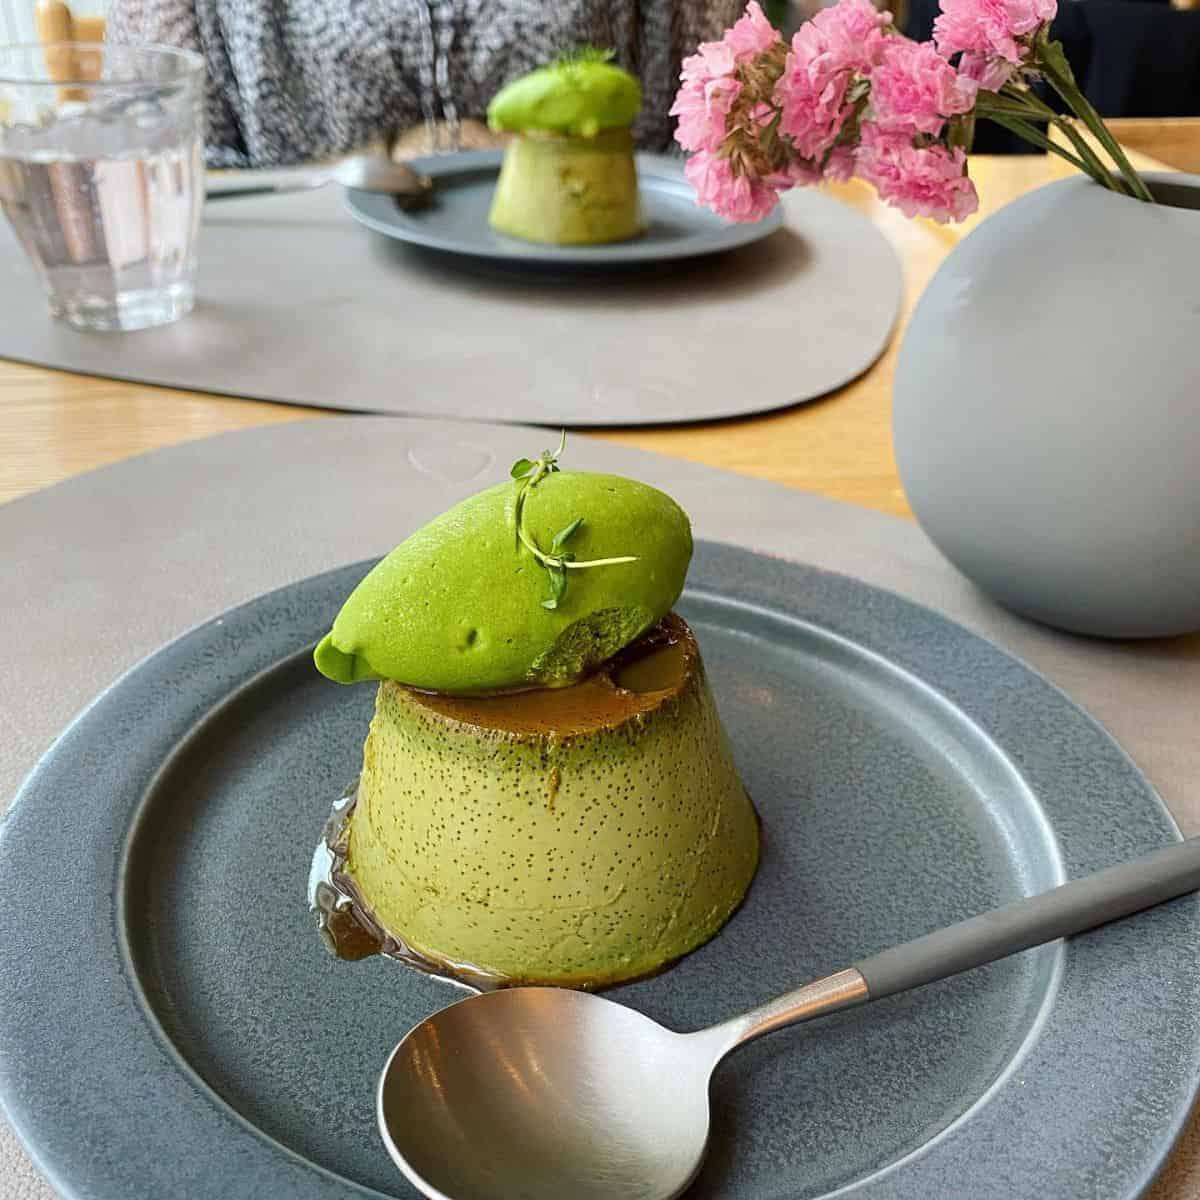 Sumptuous matcha pudding with brownish sauce and a green decor on top